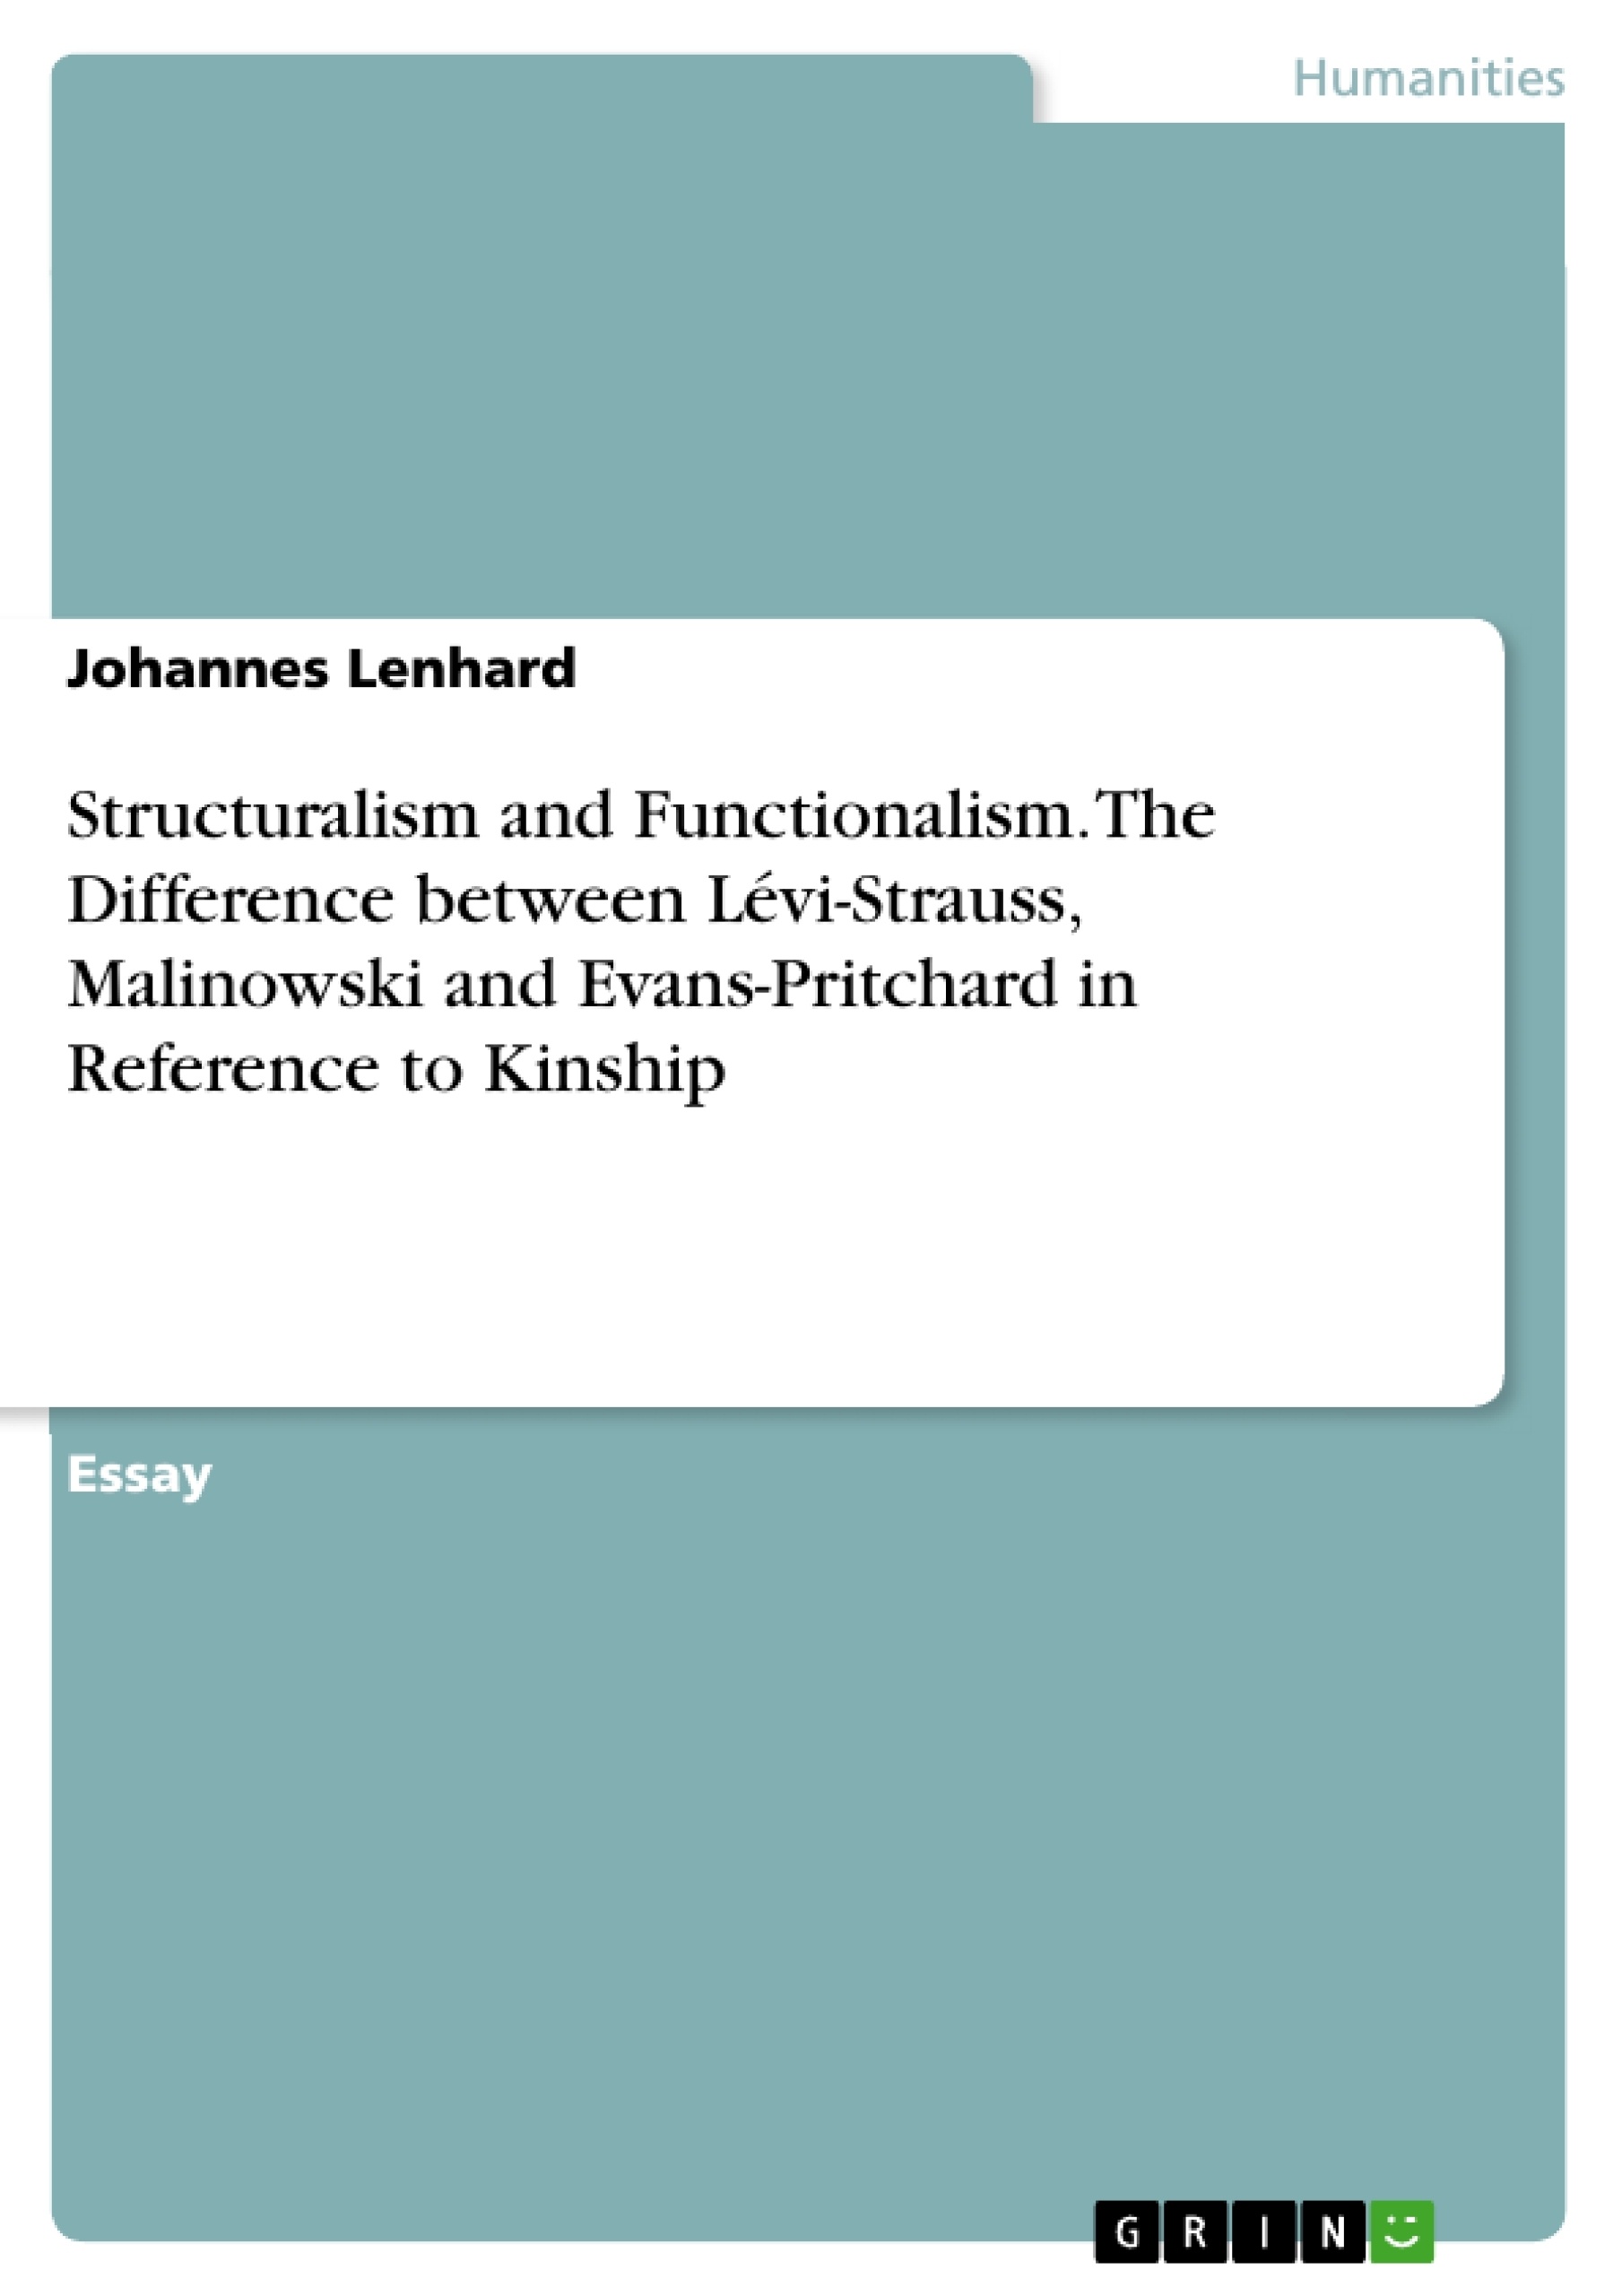 Título: Structuralism and Functionalism. The Difference between Lévi-Strauss, Malinowski and Evans-Pritchard in Reference to Kinship